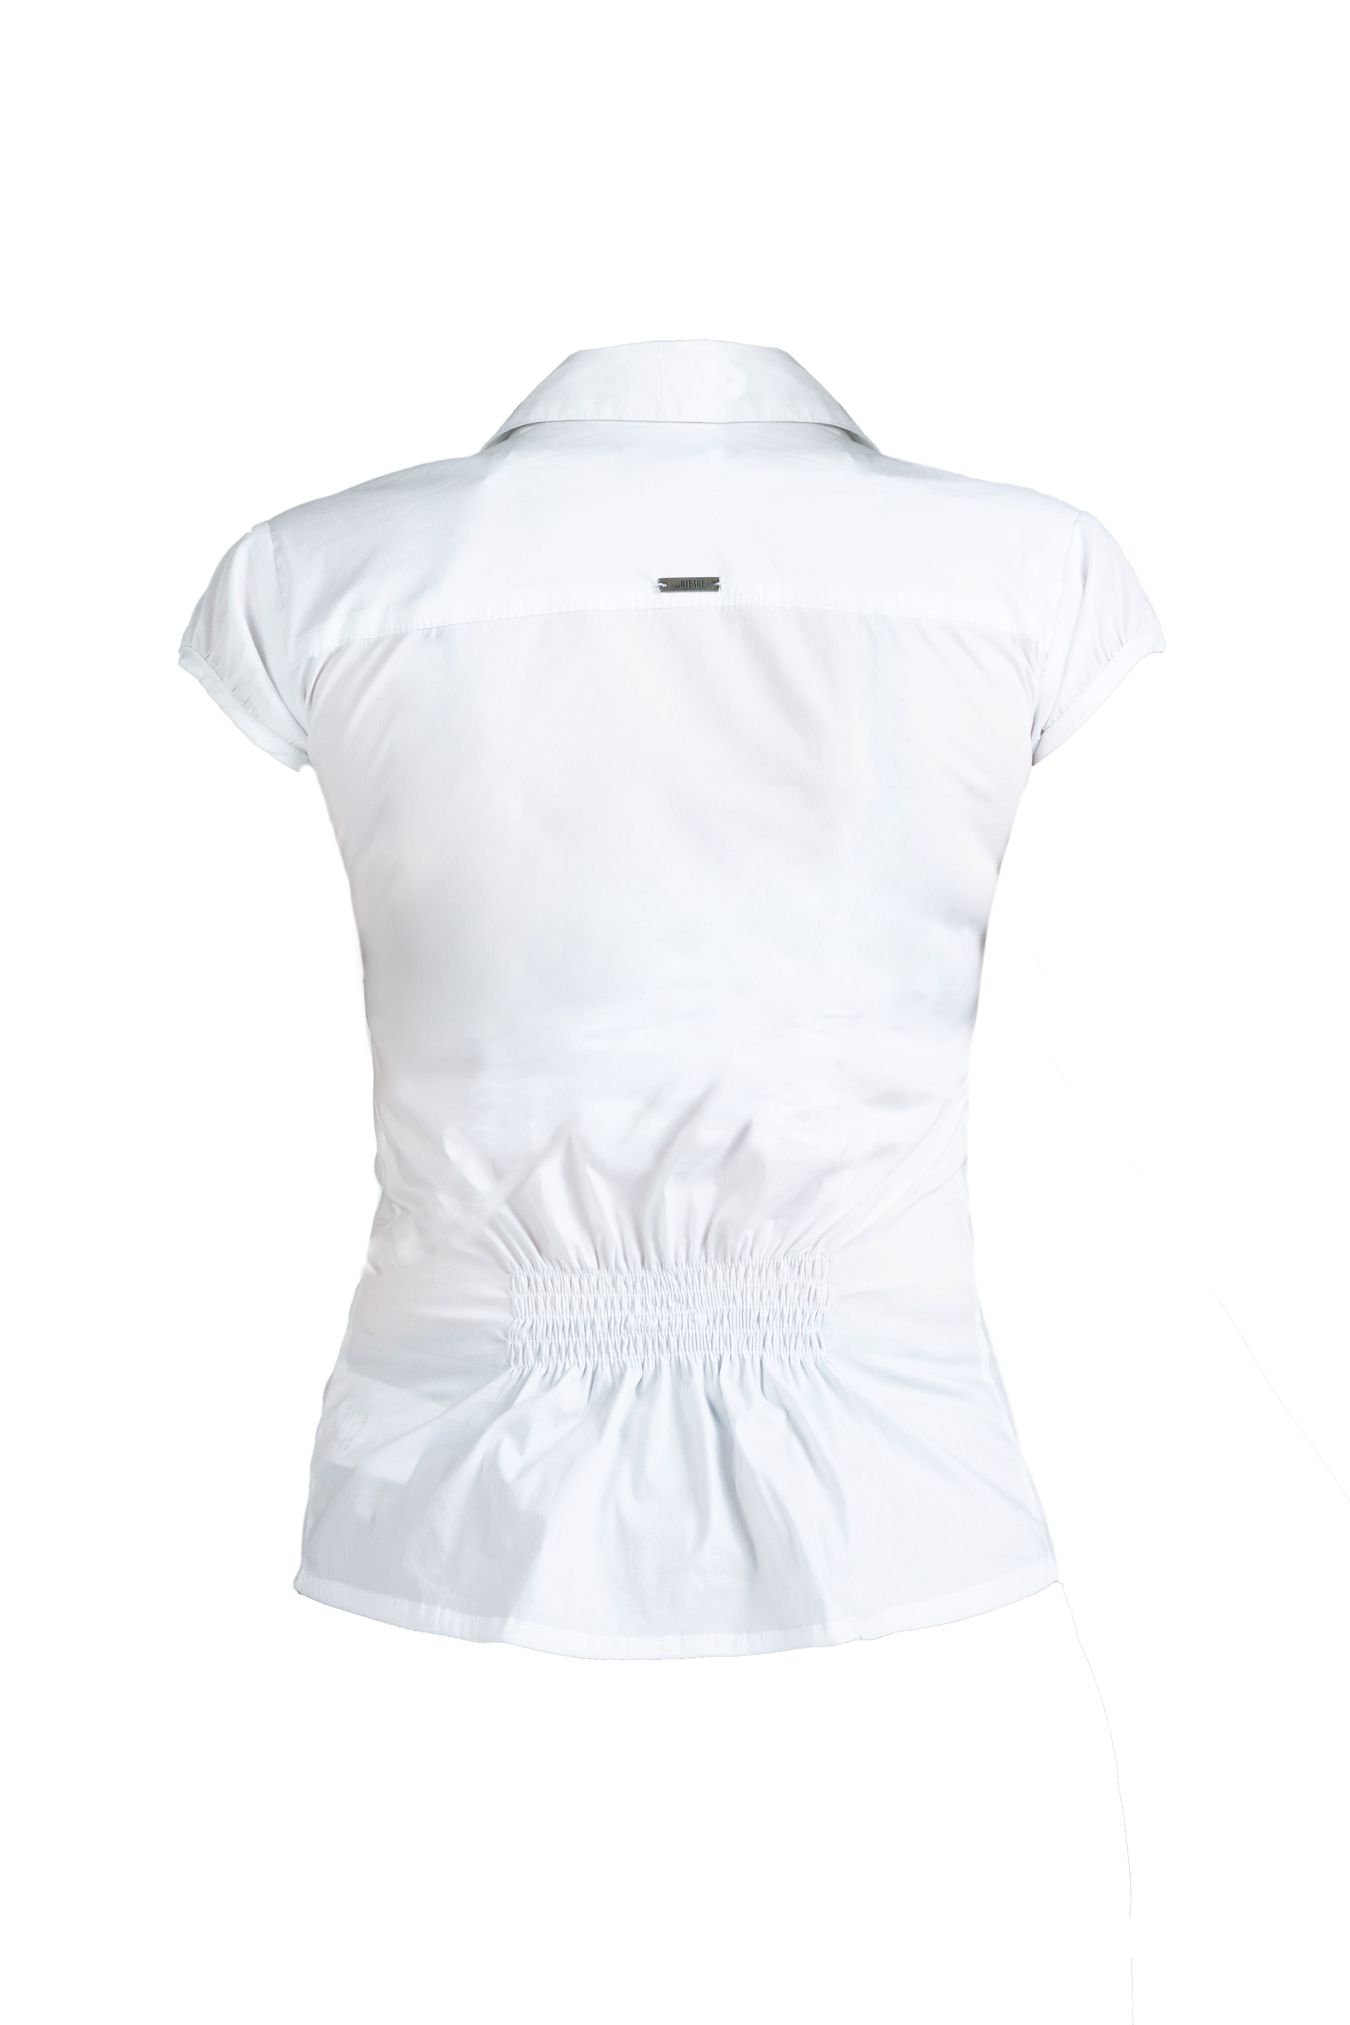 120009 RUFFLED BLOUSE WHITE - By Rieske image 3